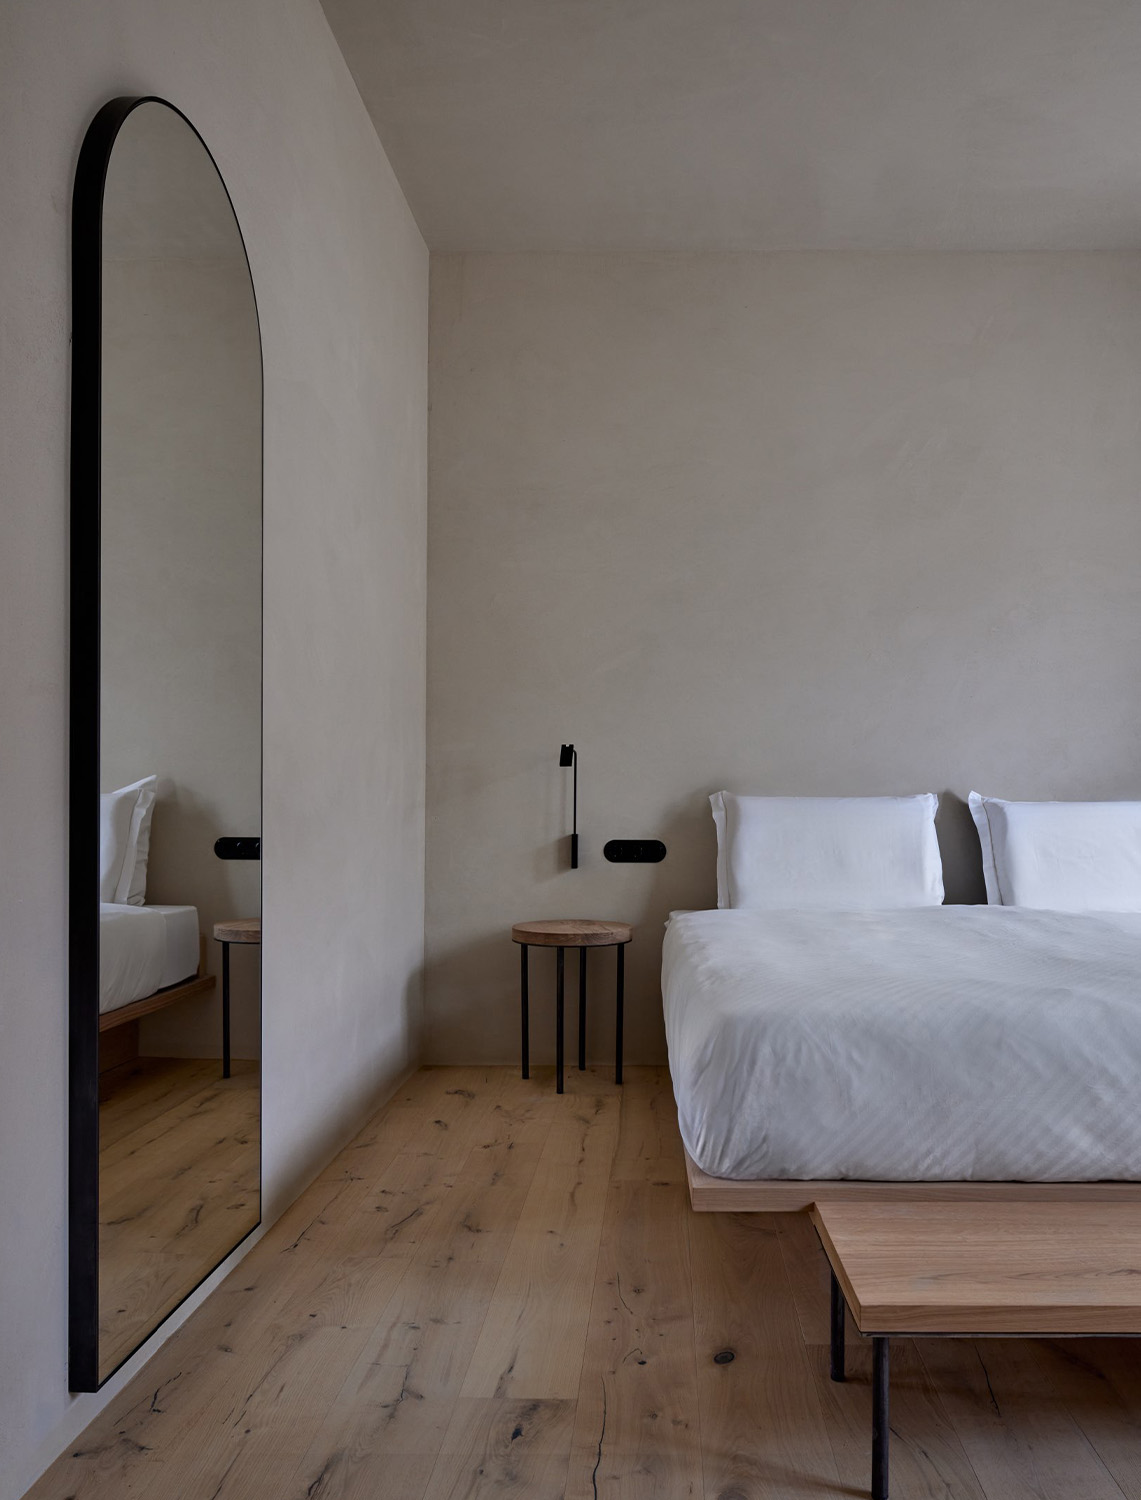 Bed with white bed linen, beautiful wooden floor, bedside table and an arch-shaped mirror on the left wall